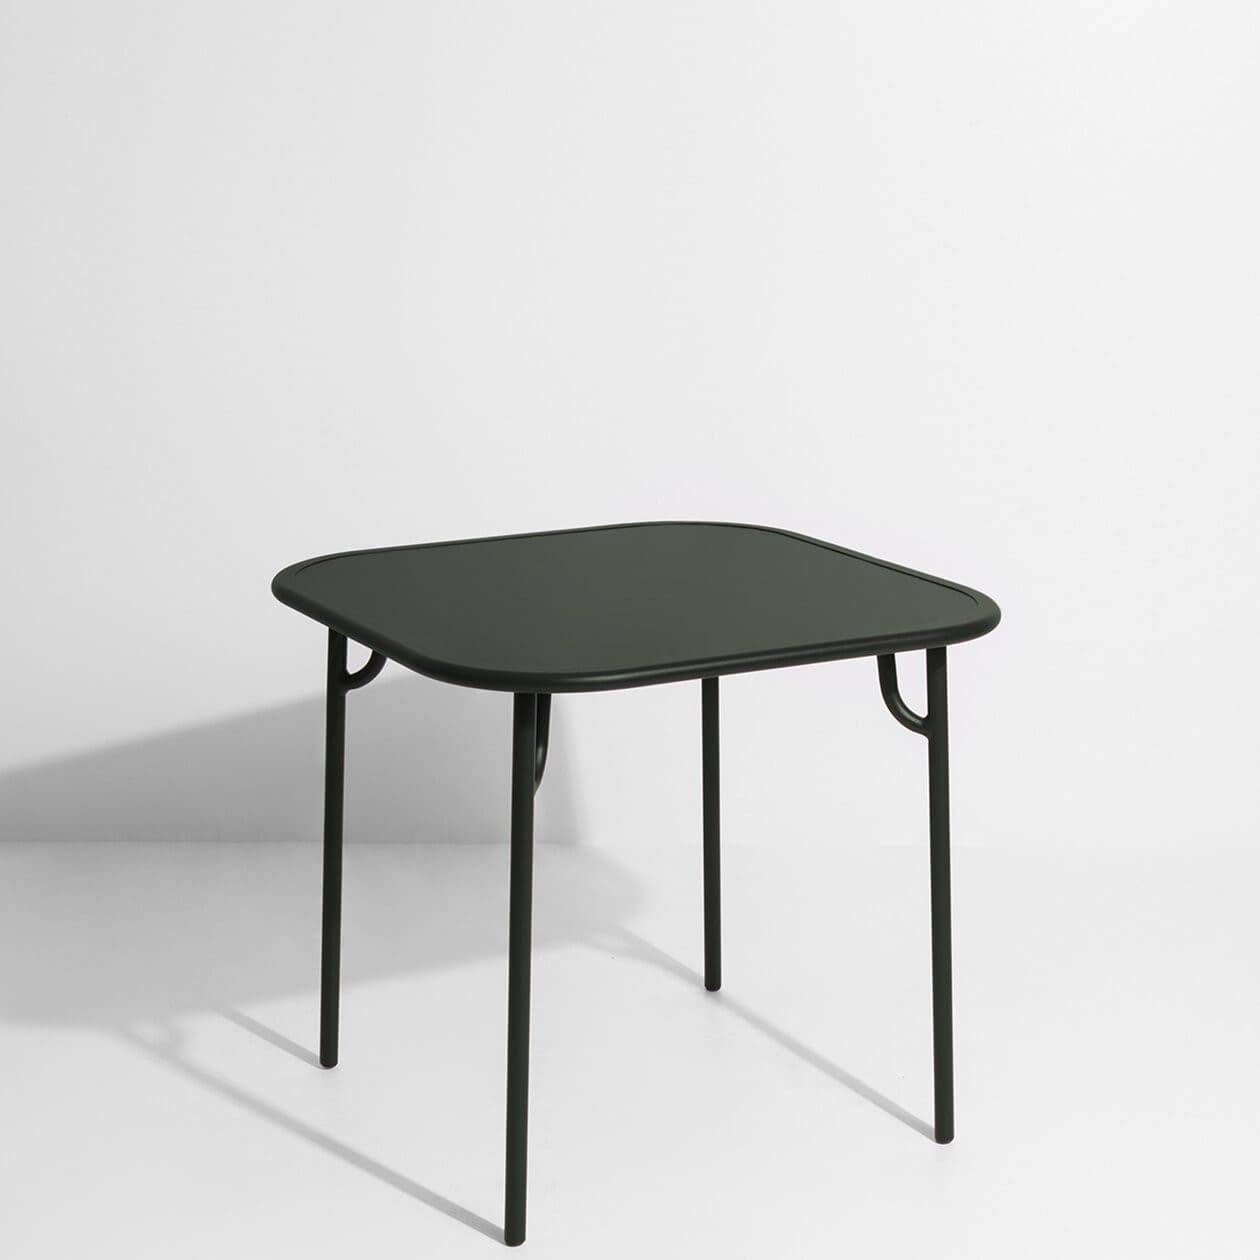 Week-End Plain Square Dining Table - Glass green